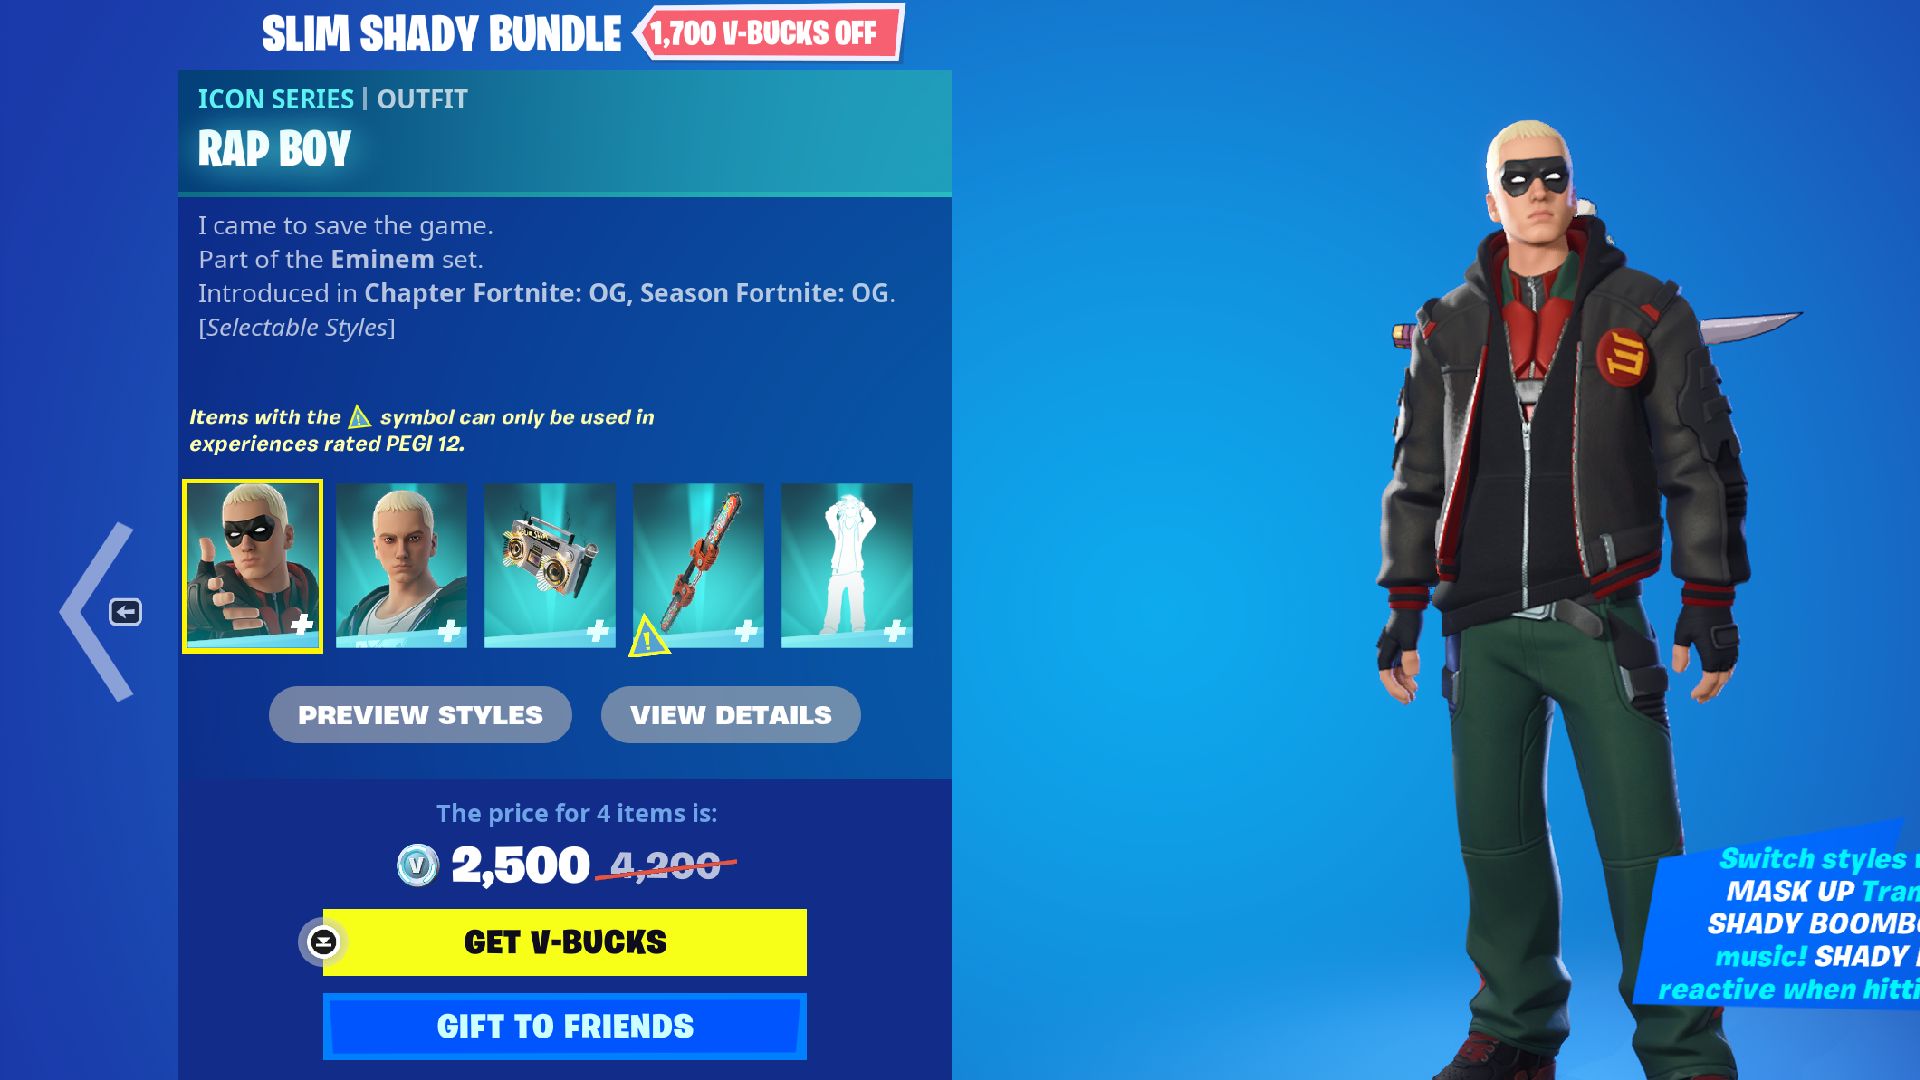 Slim Shady Bundle Contents in Fortnite